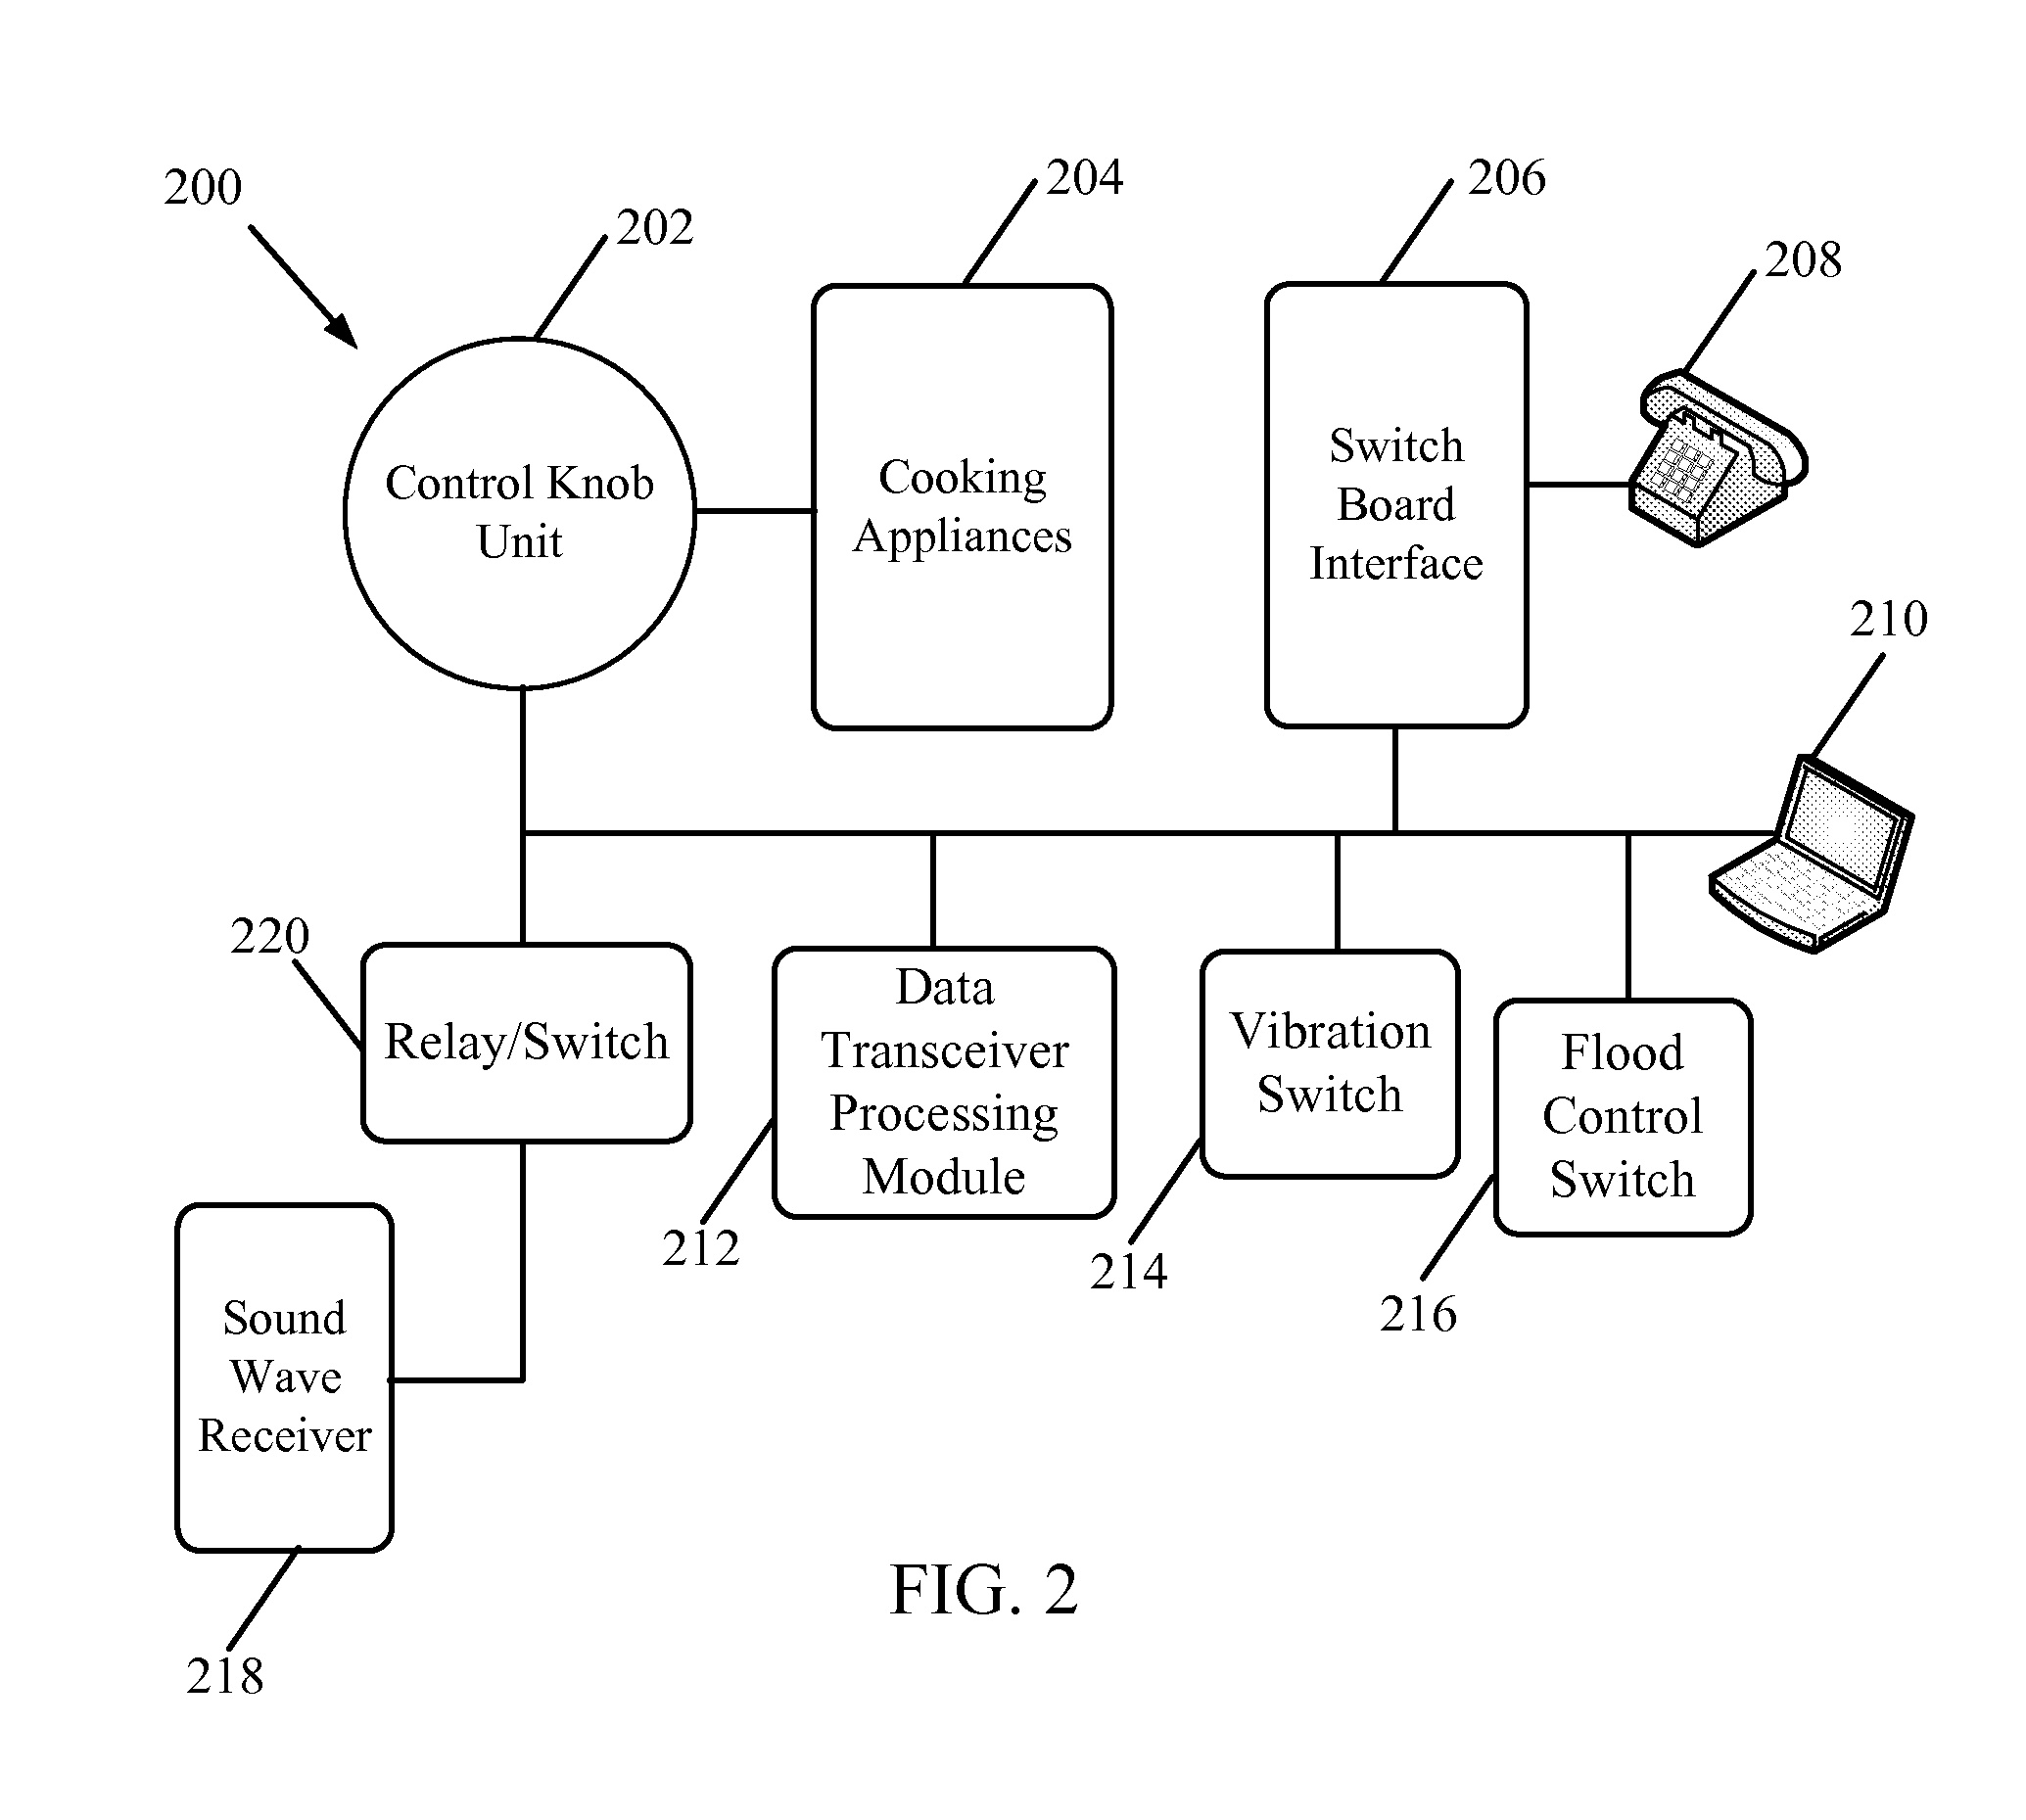 Systems and methods for automation of a control knob unit